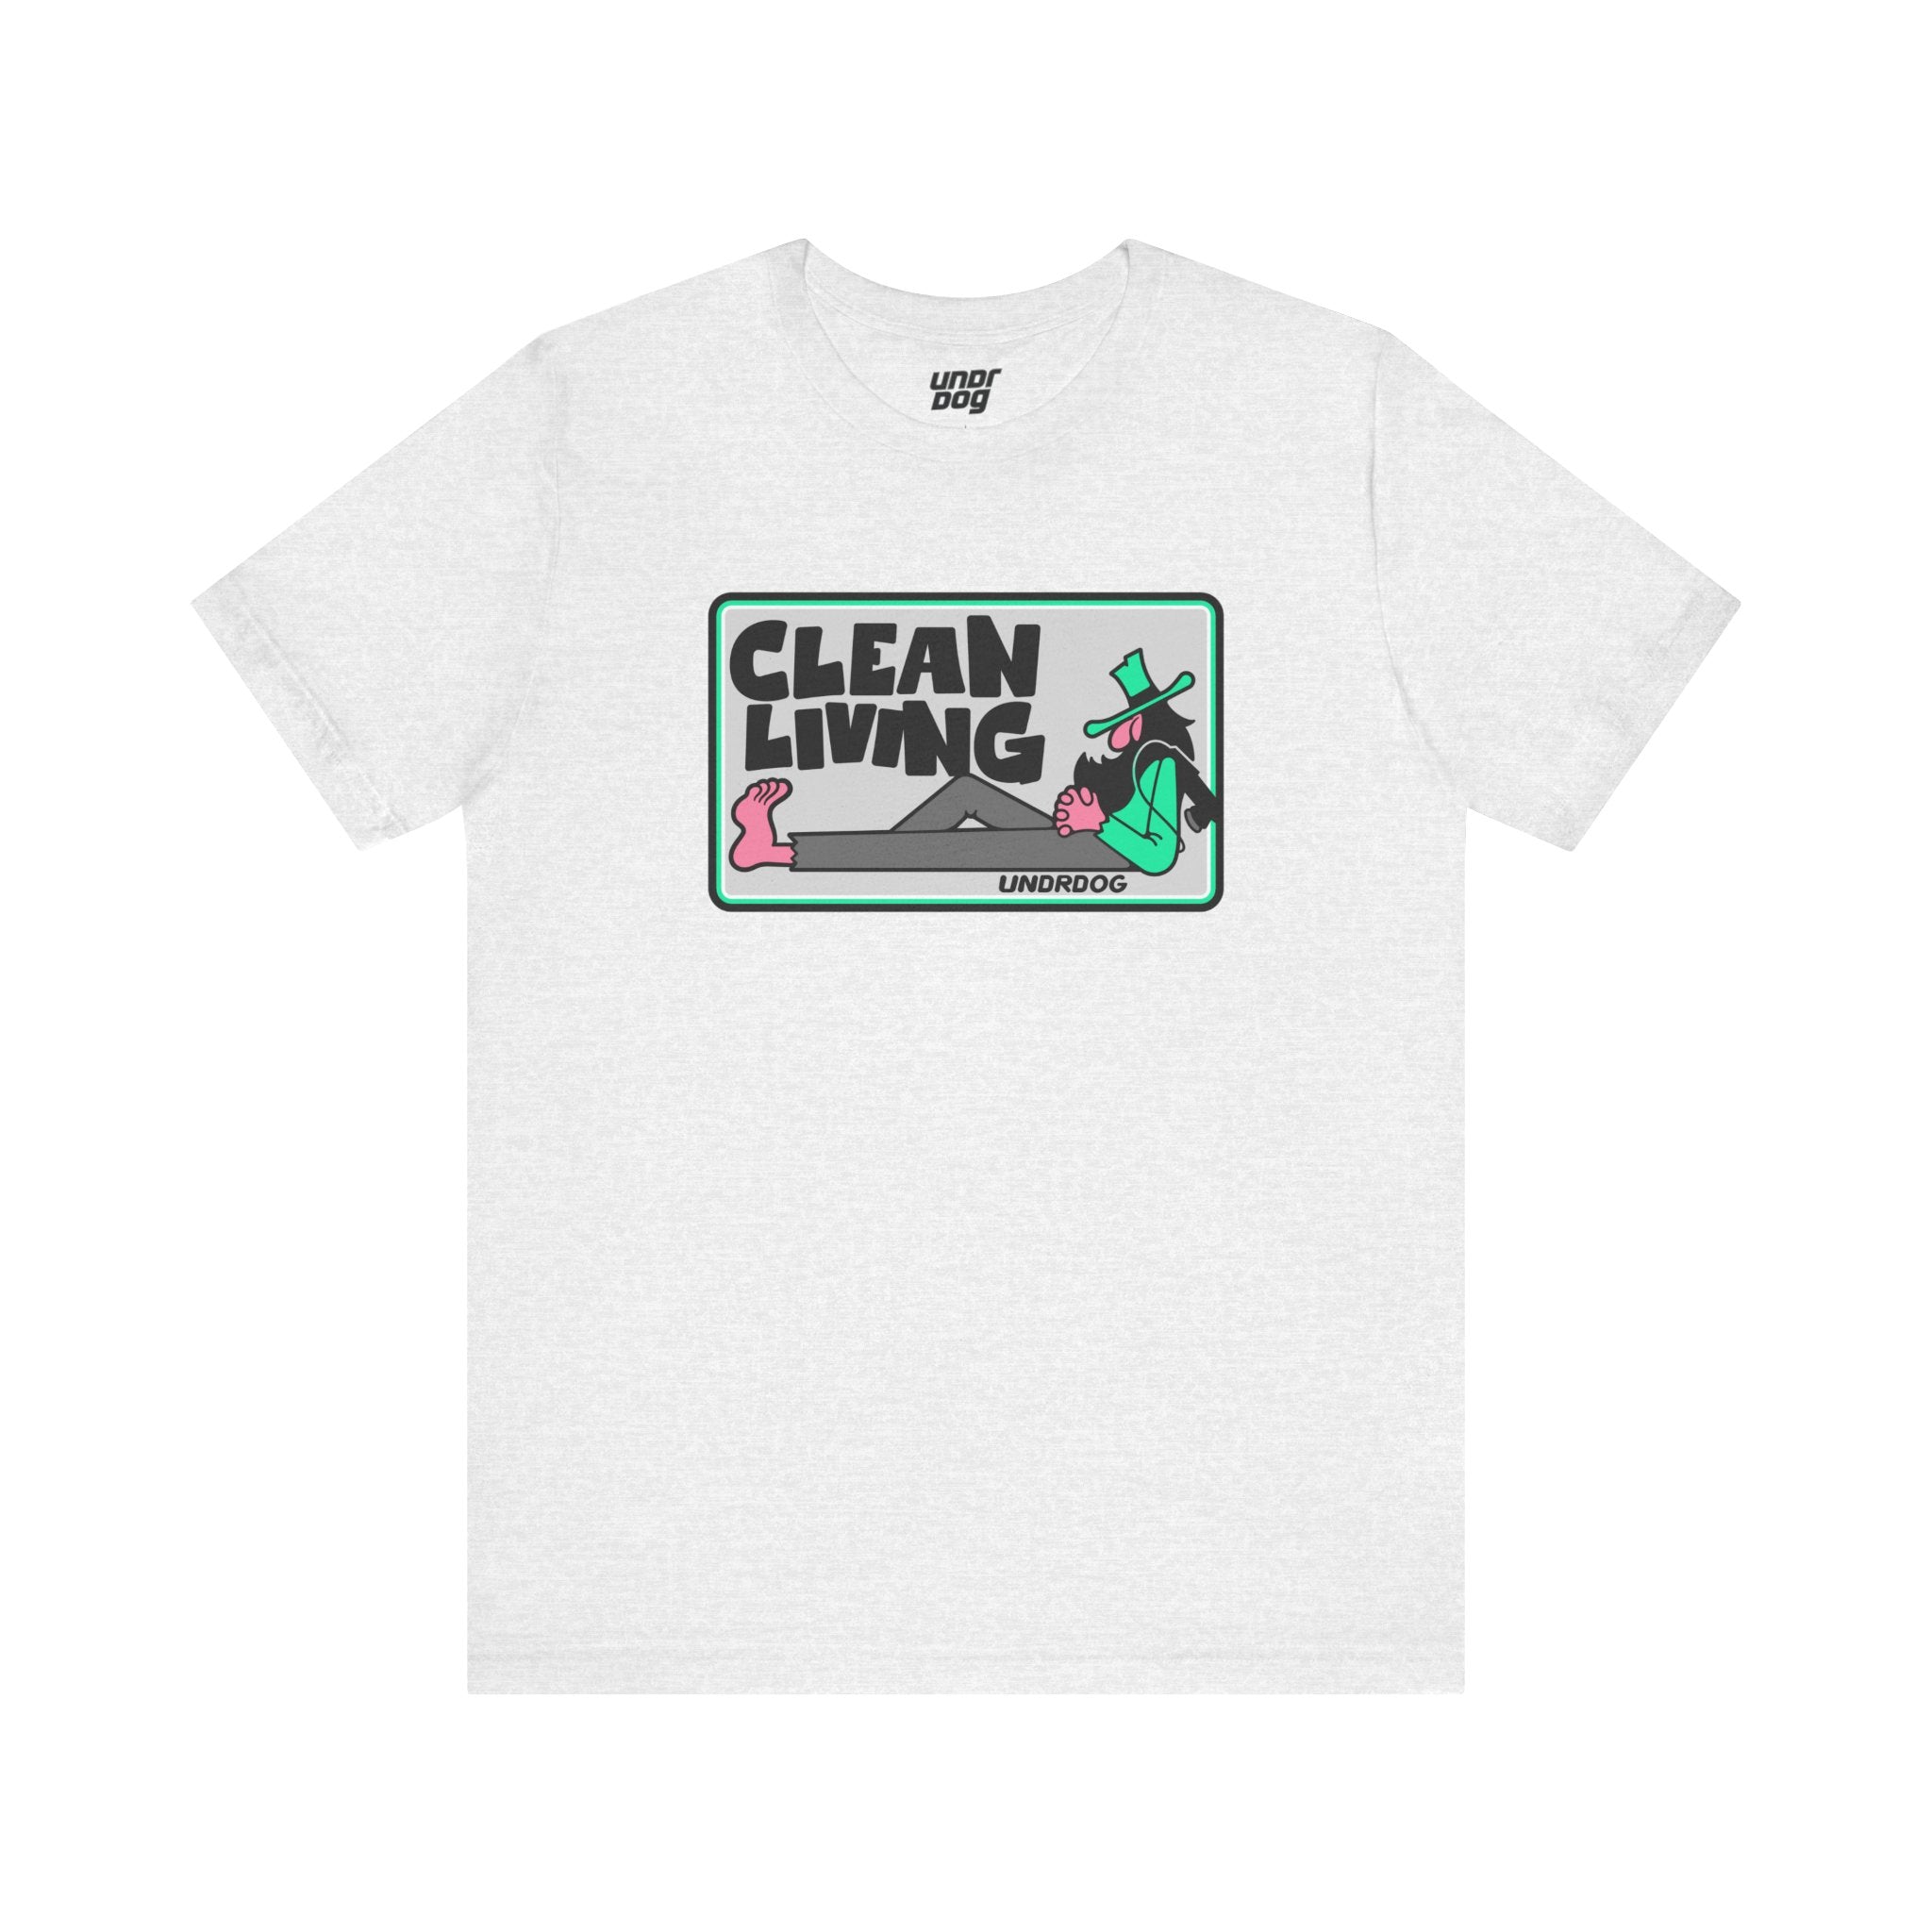 1679987791900114124_2048.jpg - Clean Living v2 by Undrdog Tee - Undrdog Surface Products